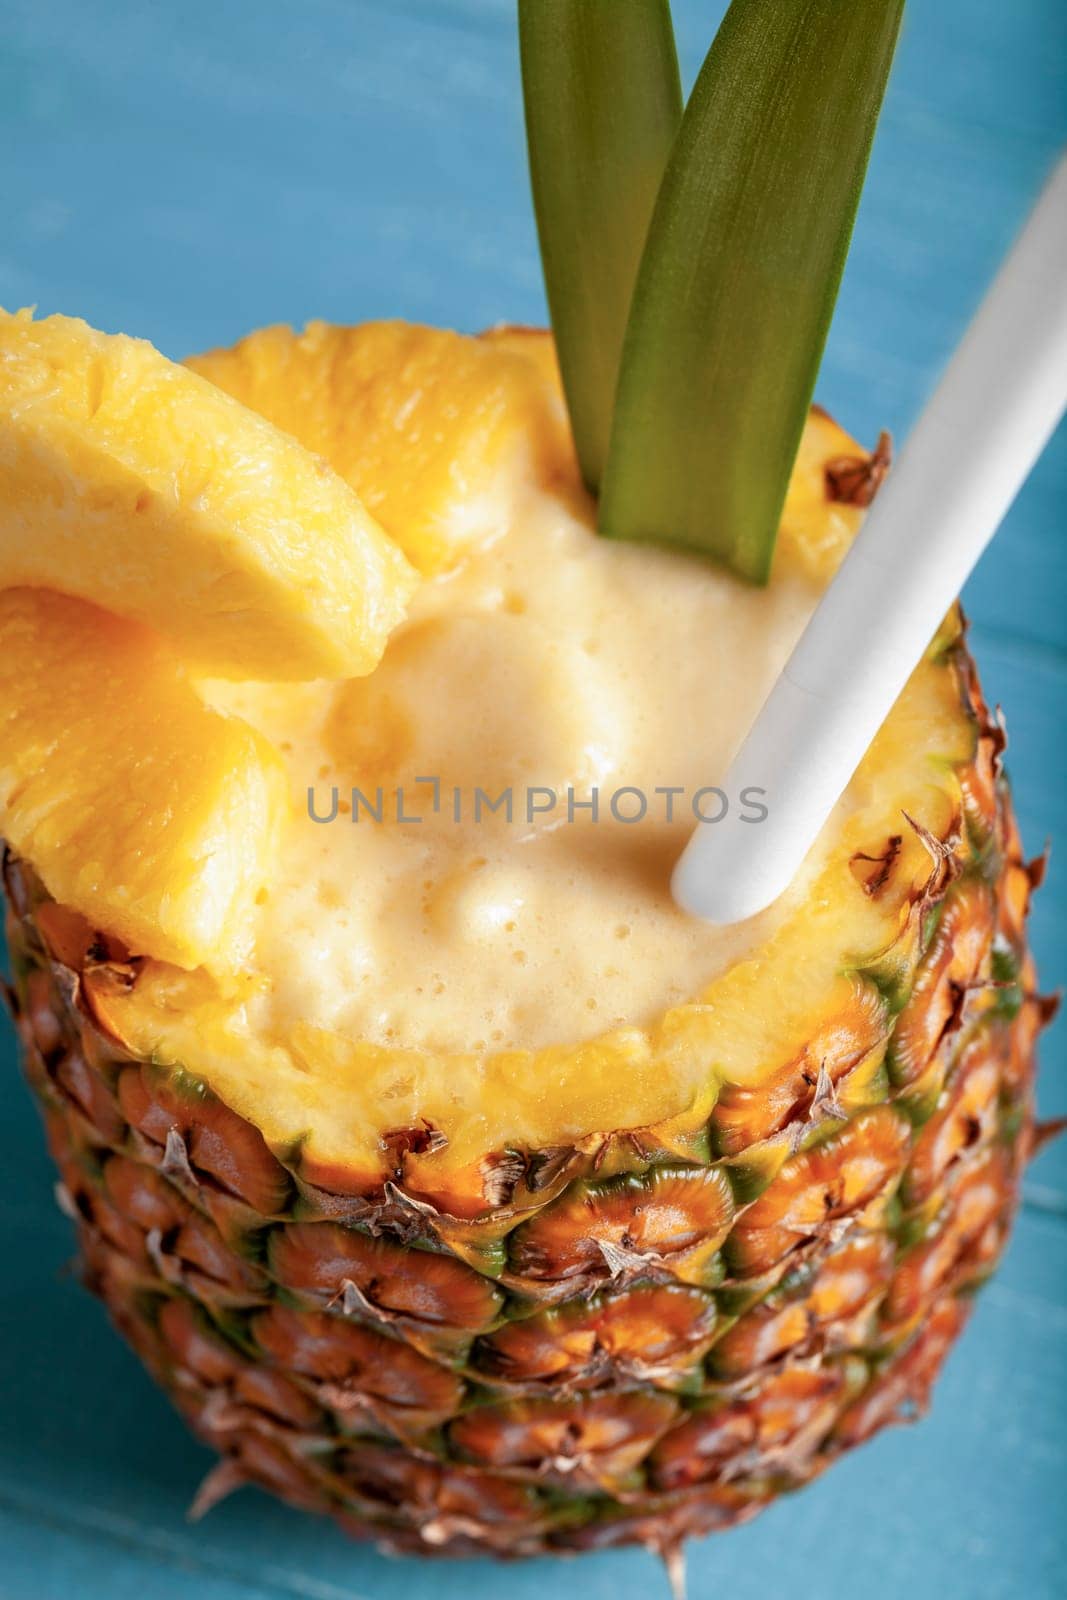 A close-up vertical photo featuring a pina colada cocktail served in a hollowed-out pineapple with pineapple wedges, a straw, and green leaves on a blue wooden background